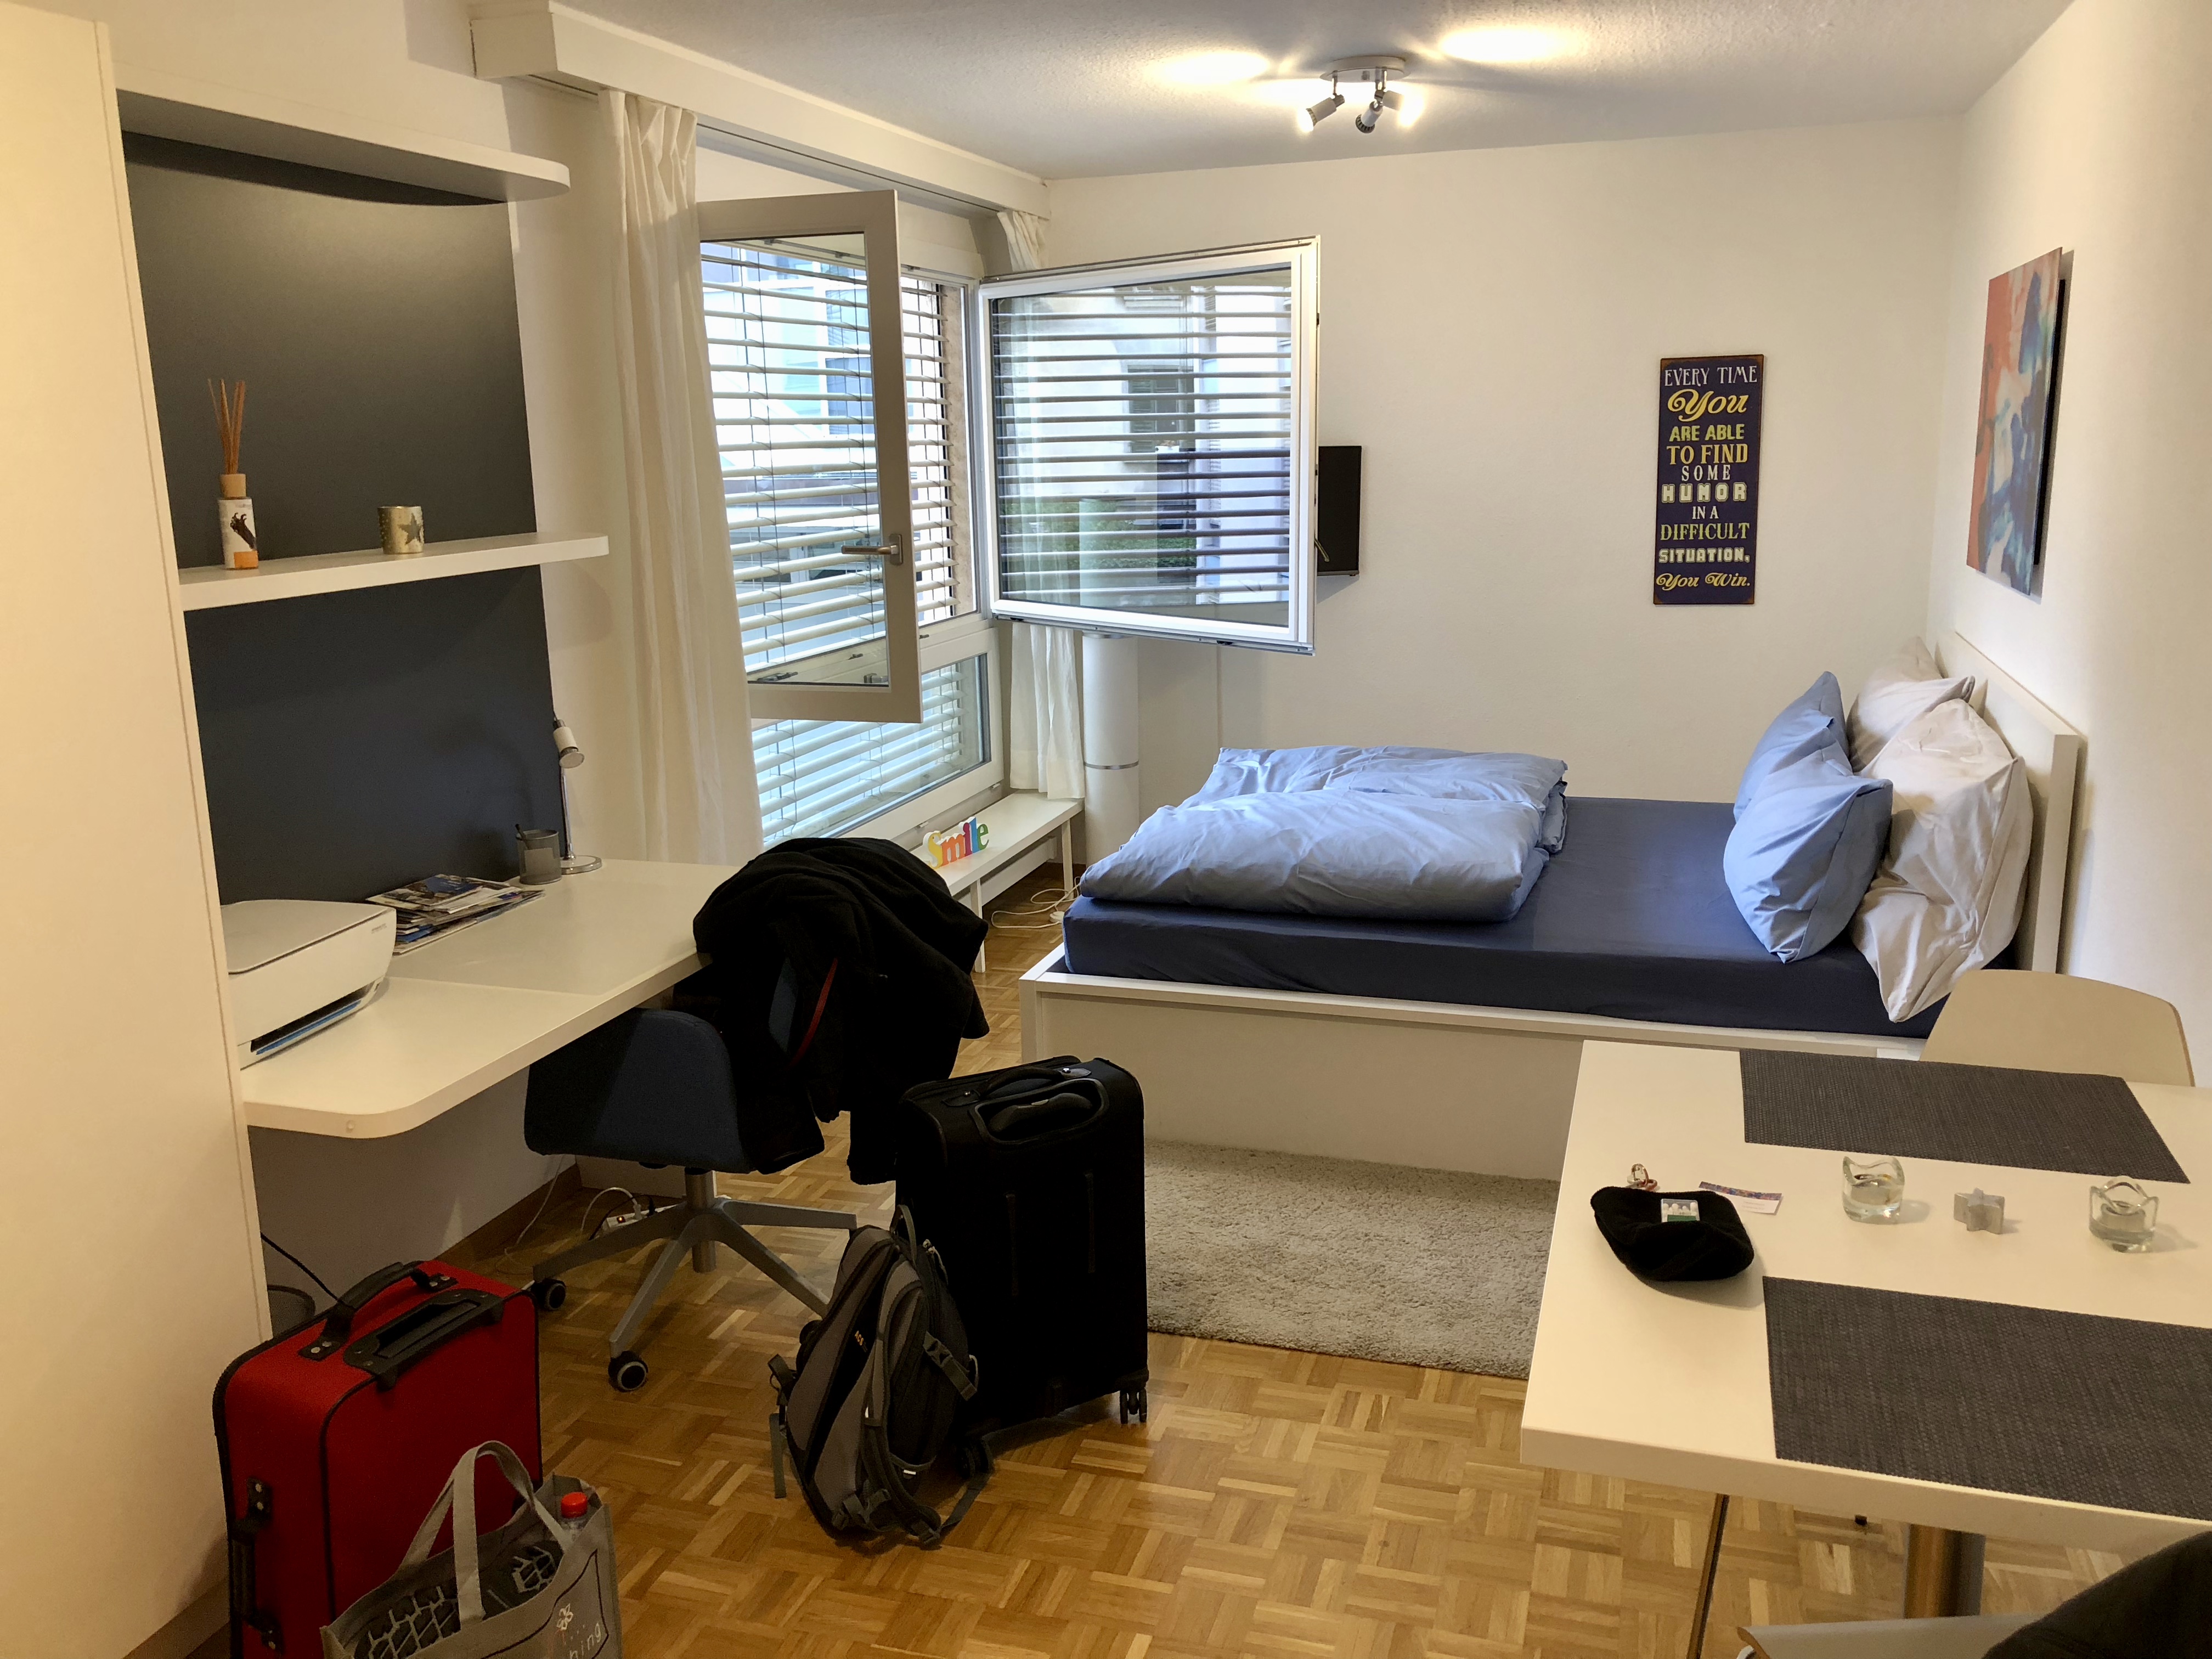 A picture of our studio apartment rental in Zurich, Switzerland.